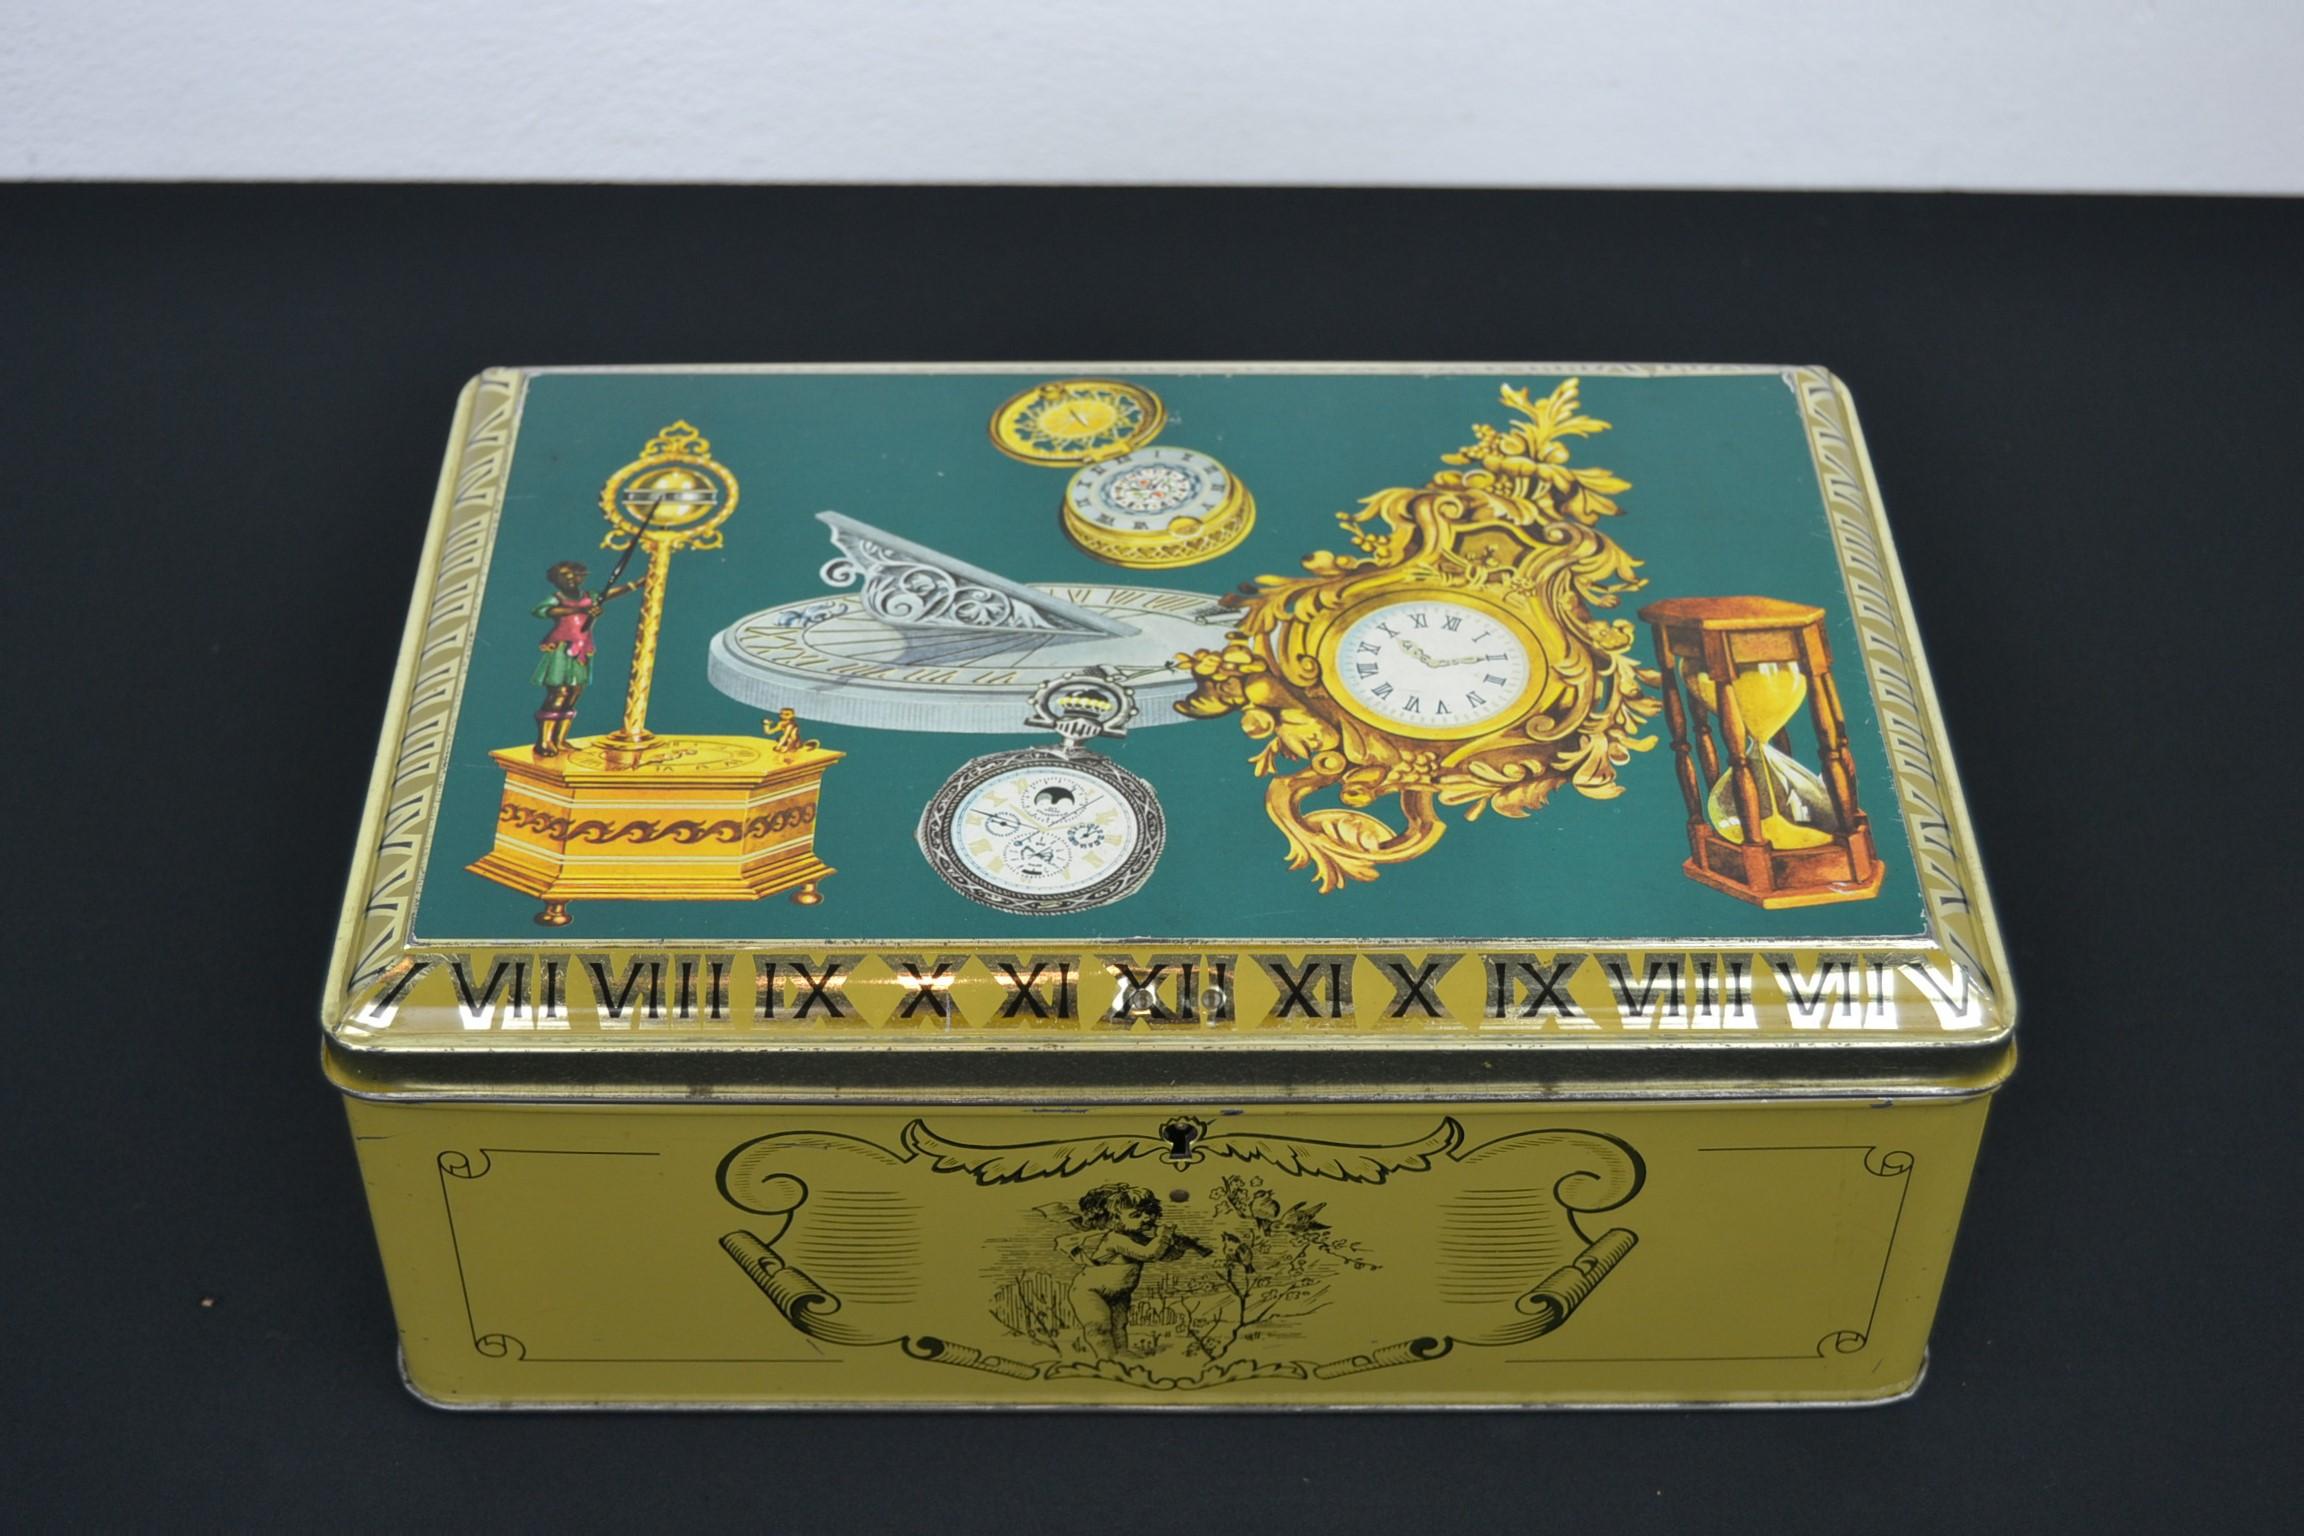 Vintage confectionary tin with theme: Antique clocks and watches, antique timepieces
This 1950s tin box is a great decorative box or storage box with beautiful design on the lid of antique timepieces like pendulum clock, antique pocket watch,